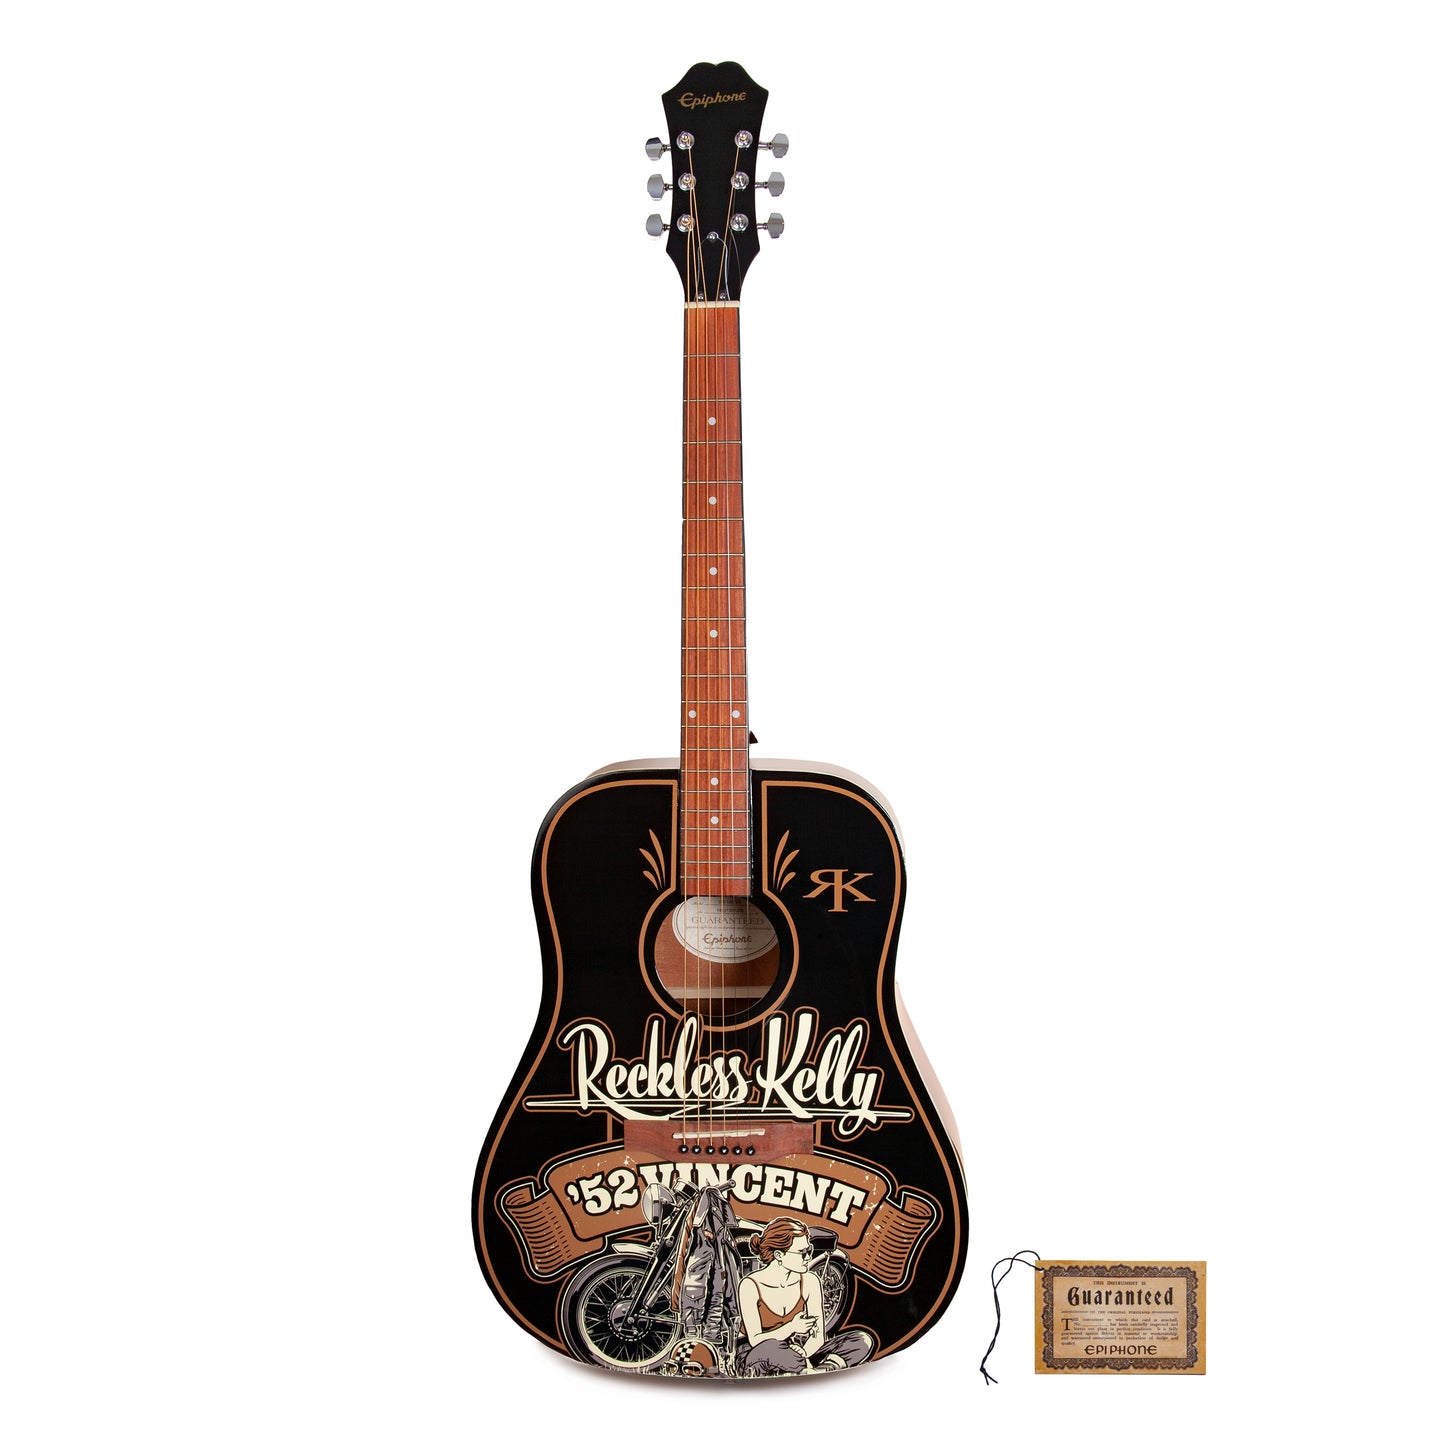 52 Vincent Guitar  - AUTOGRAPHED BY RECKLESS KELLY